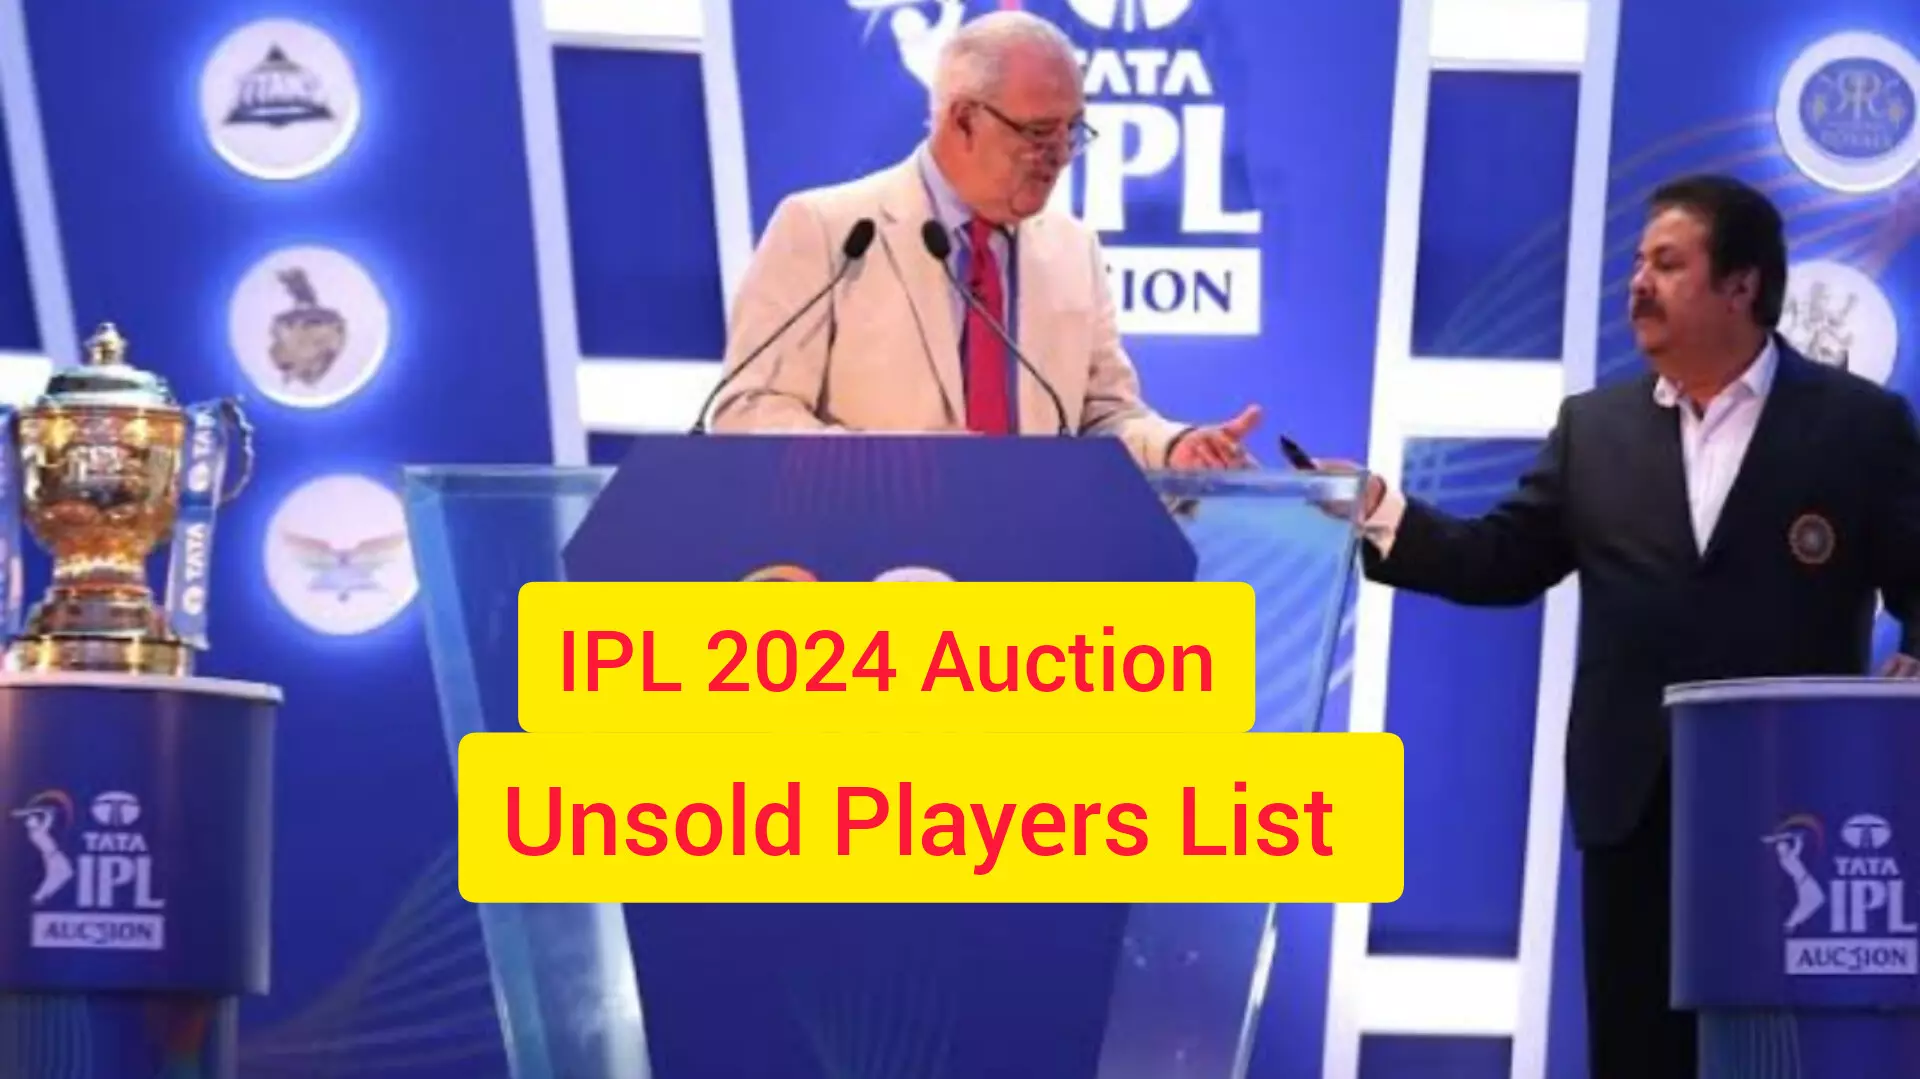 IPL 2024 Auction Unsold Players List (Pic Credit -Social Media)